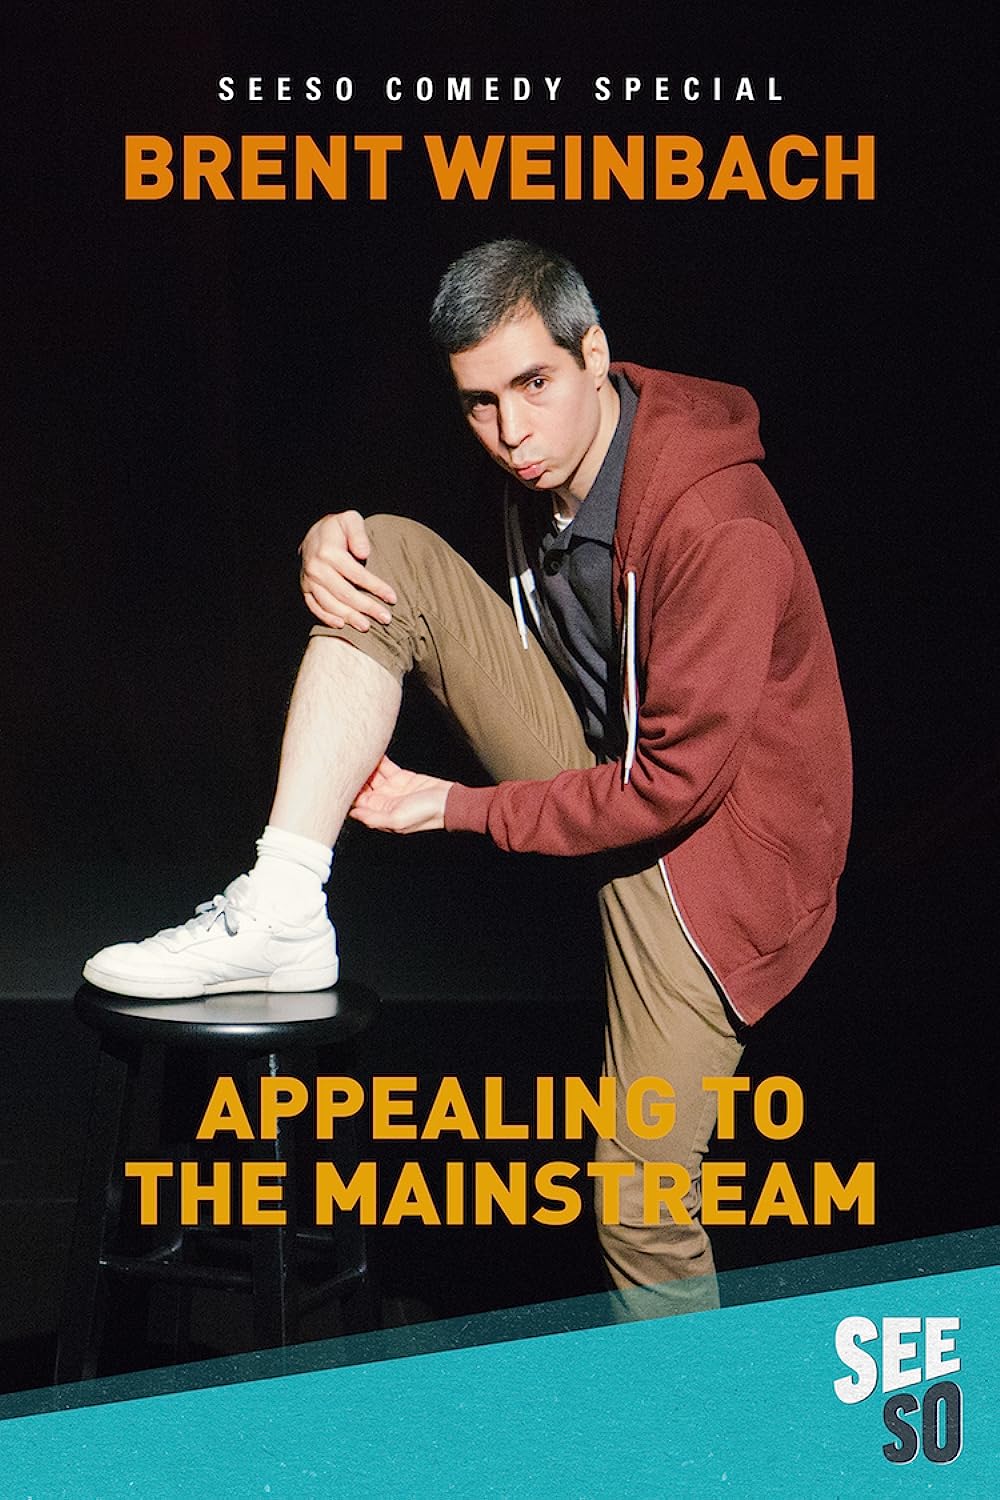     Brent Weinbach: Appealing to the Mainstream